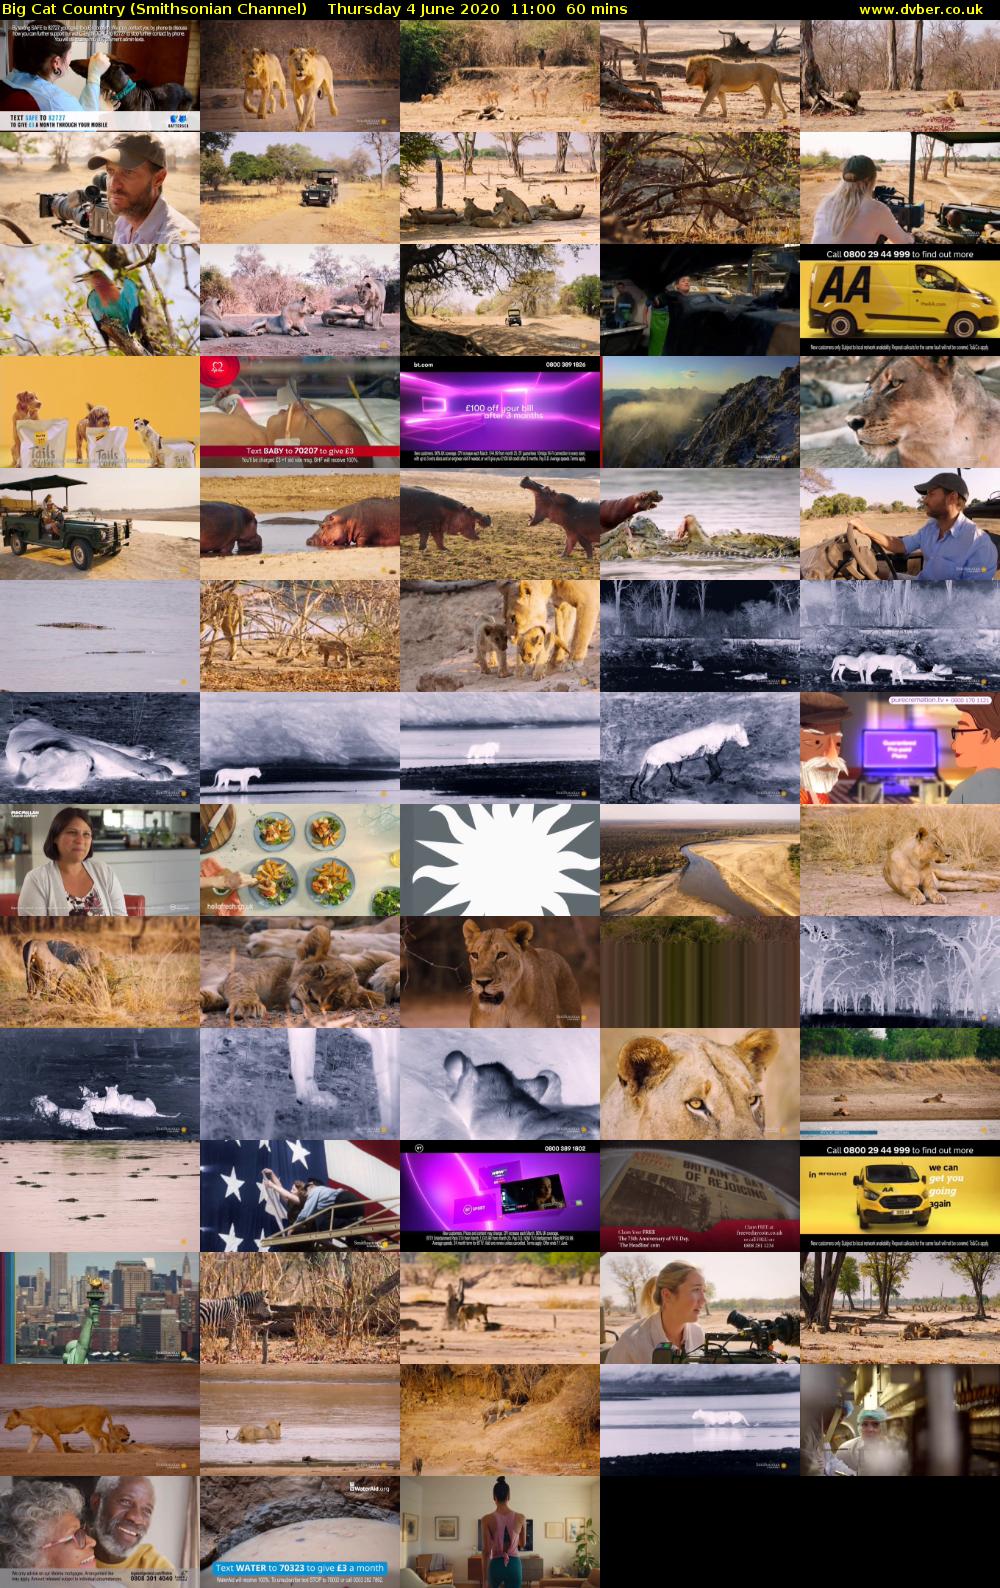 Big Cat Country (Smithsonian Channel) Thursday 4 June 2020 11:00 - 12:00